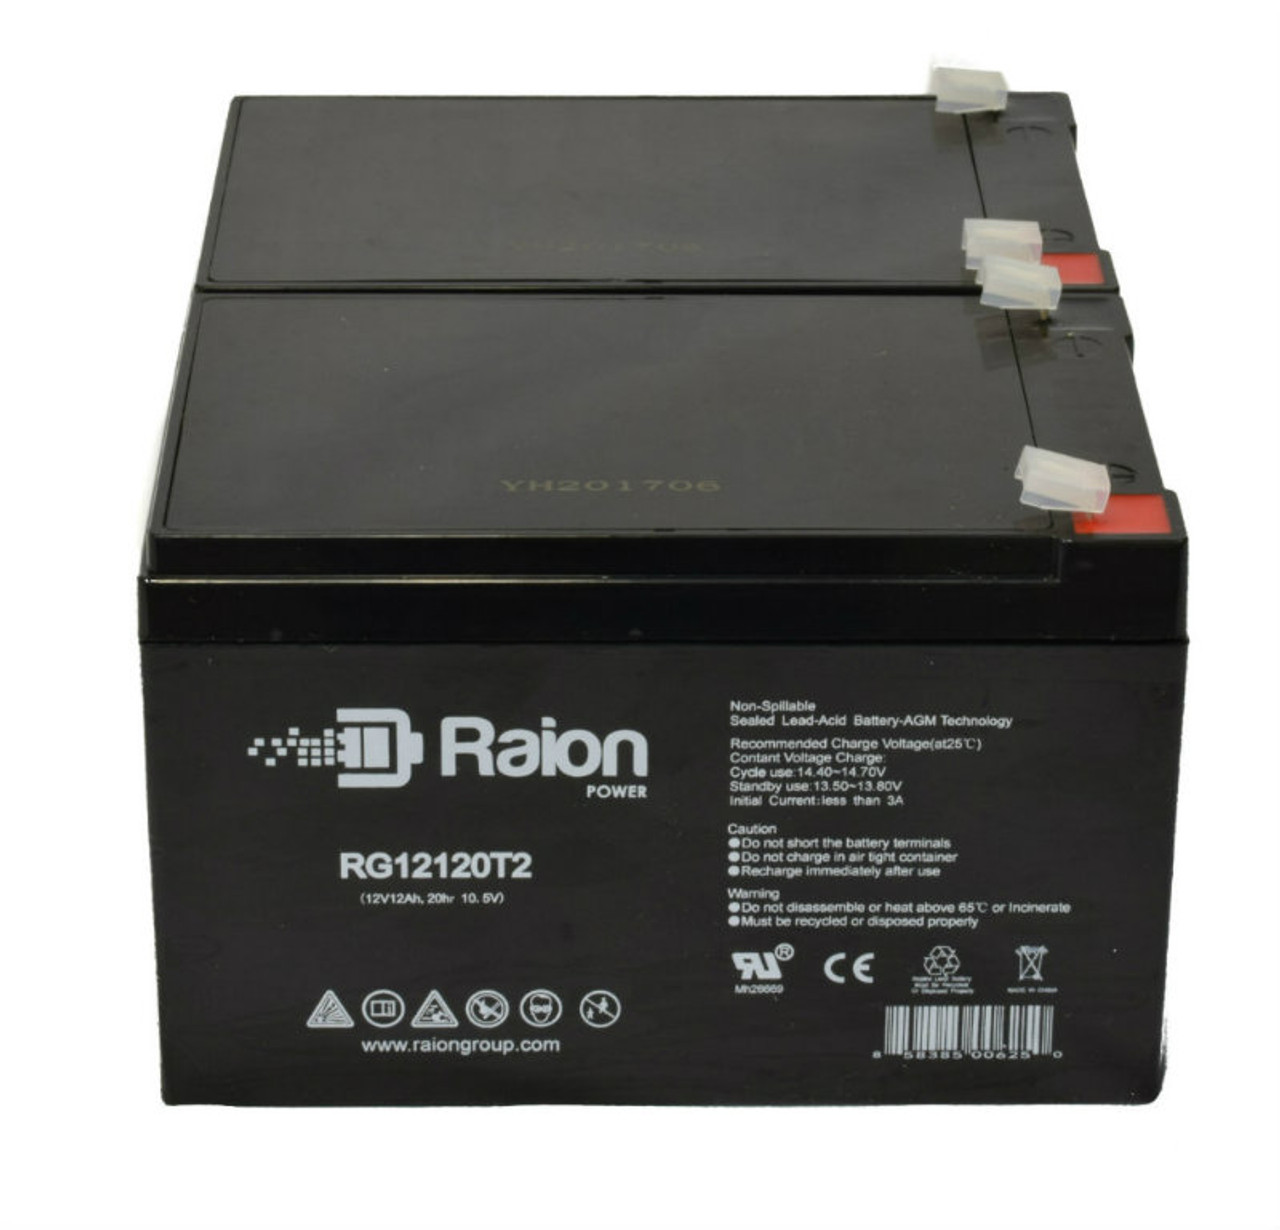 Raion Power 12V 12Ah Non-Spillable Compatible Replacement Battery for Fuli FL12100DC - (2 Pack)